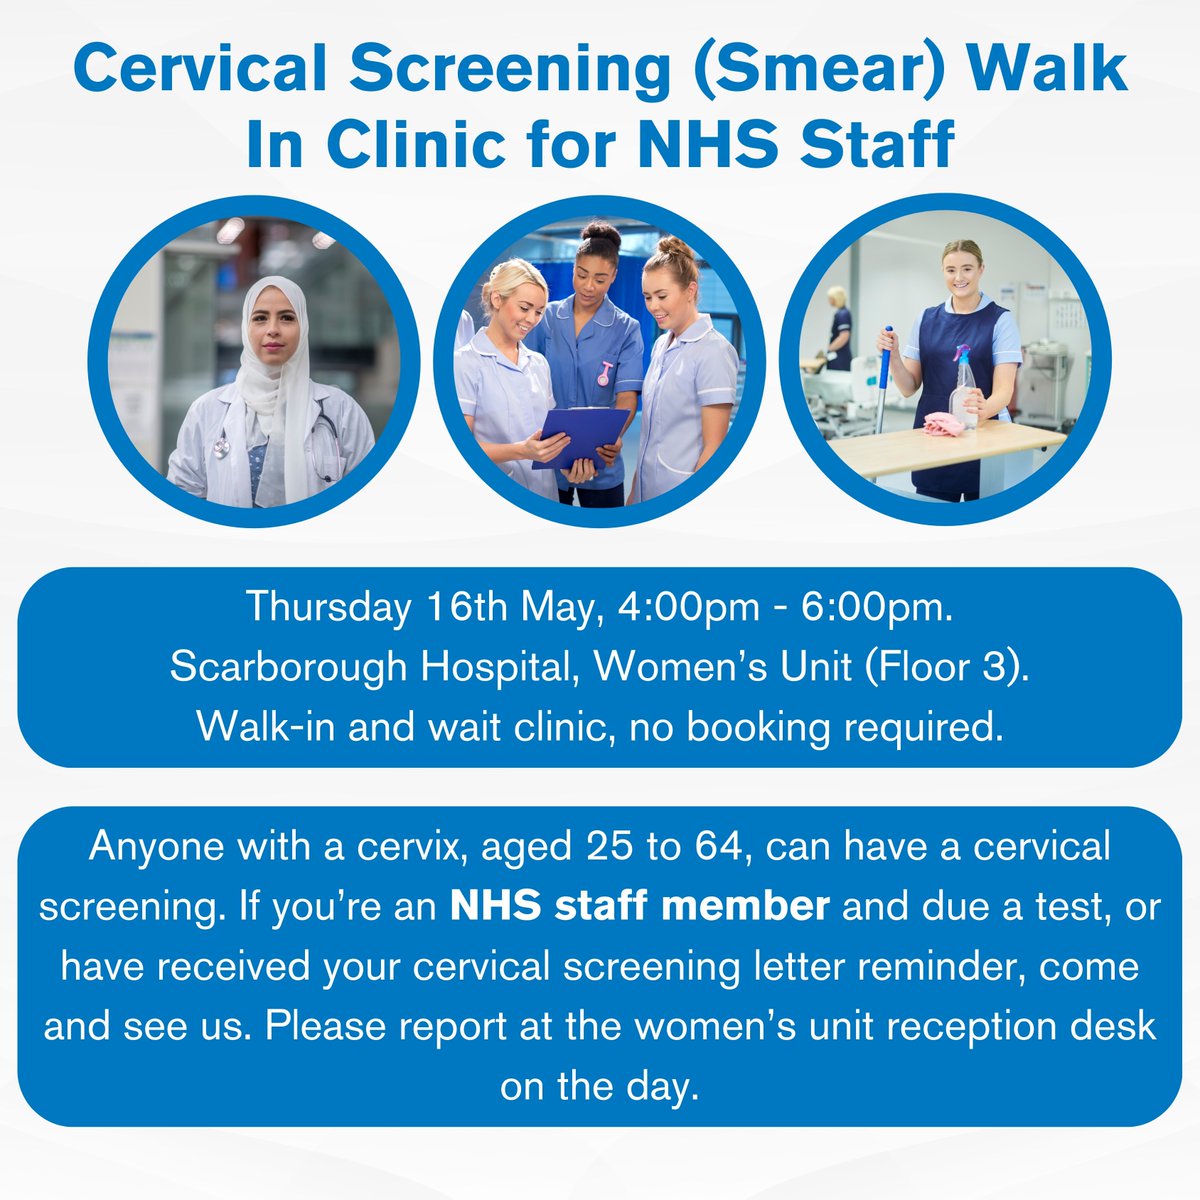 Are you an NHS staff member and due your cervical screening? We’re supporting a walk-in and wait clinic for staff in Scarborough Hospital on 16th May, 4:00pm - 6:00pm. No booking is required – simply register at the Women's Unit reception desk on the day. #CervicalScreening